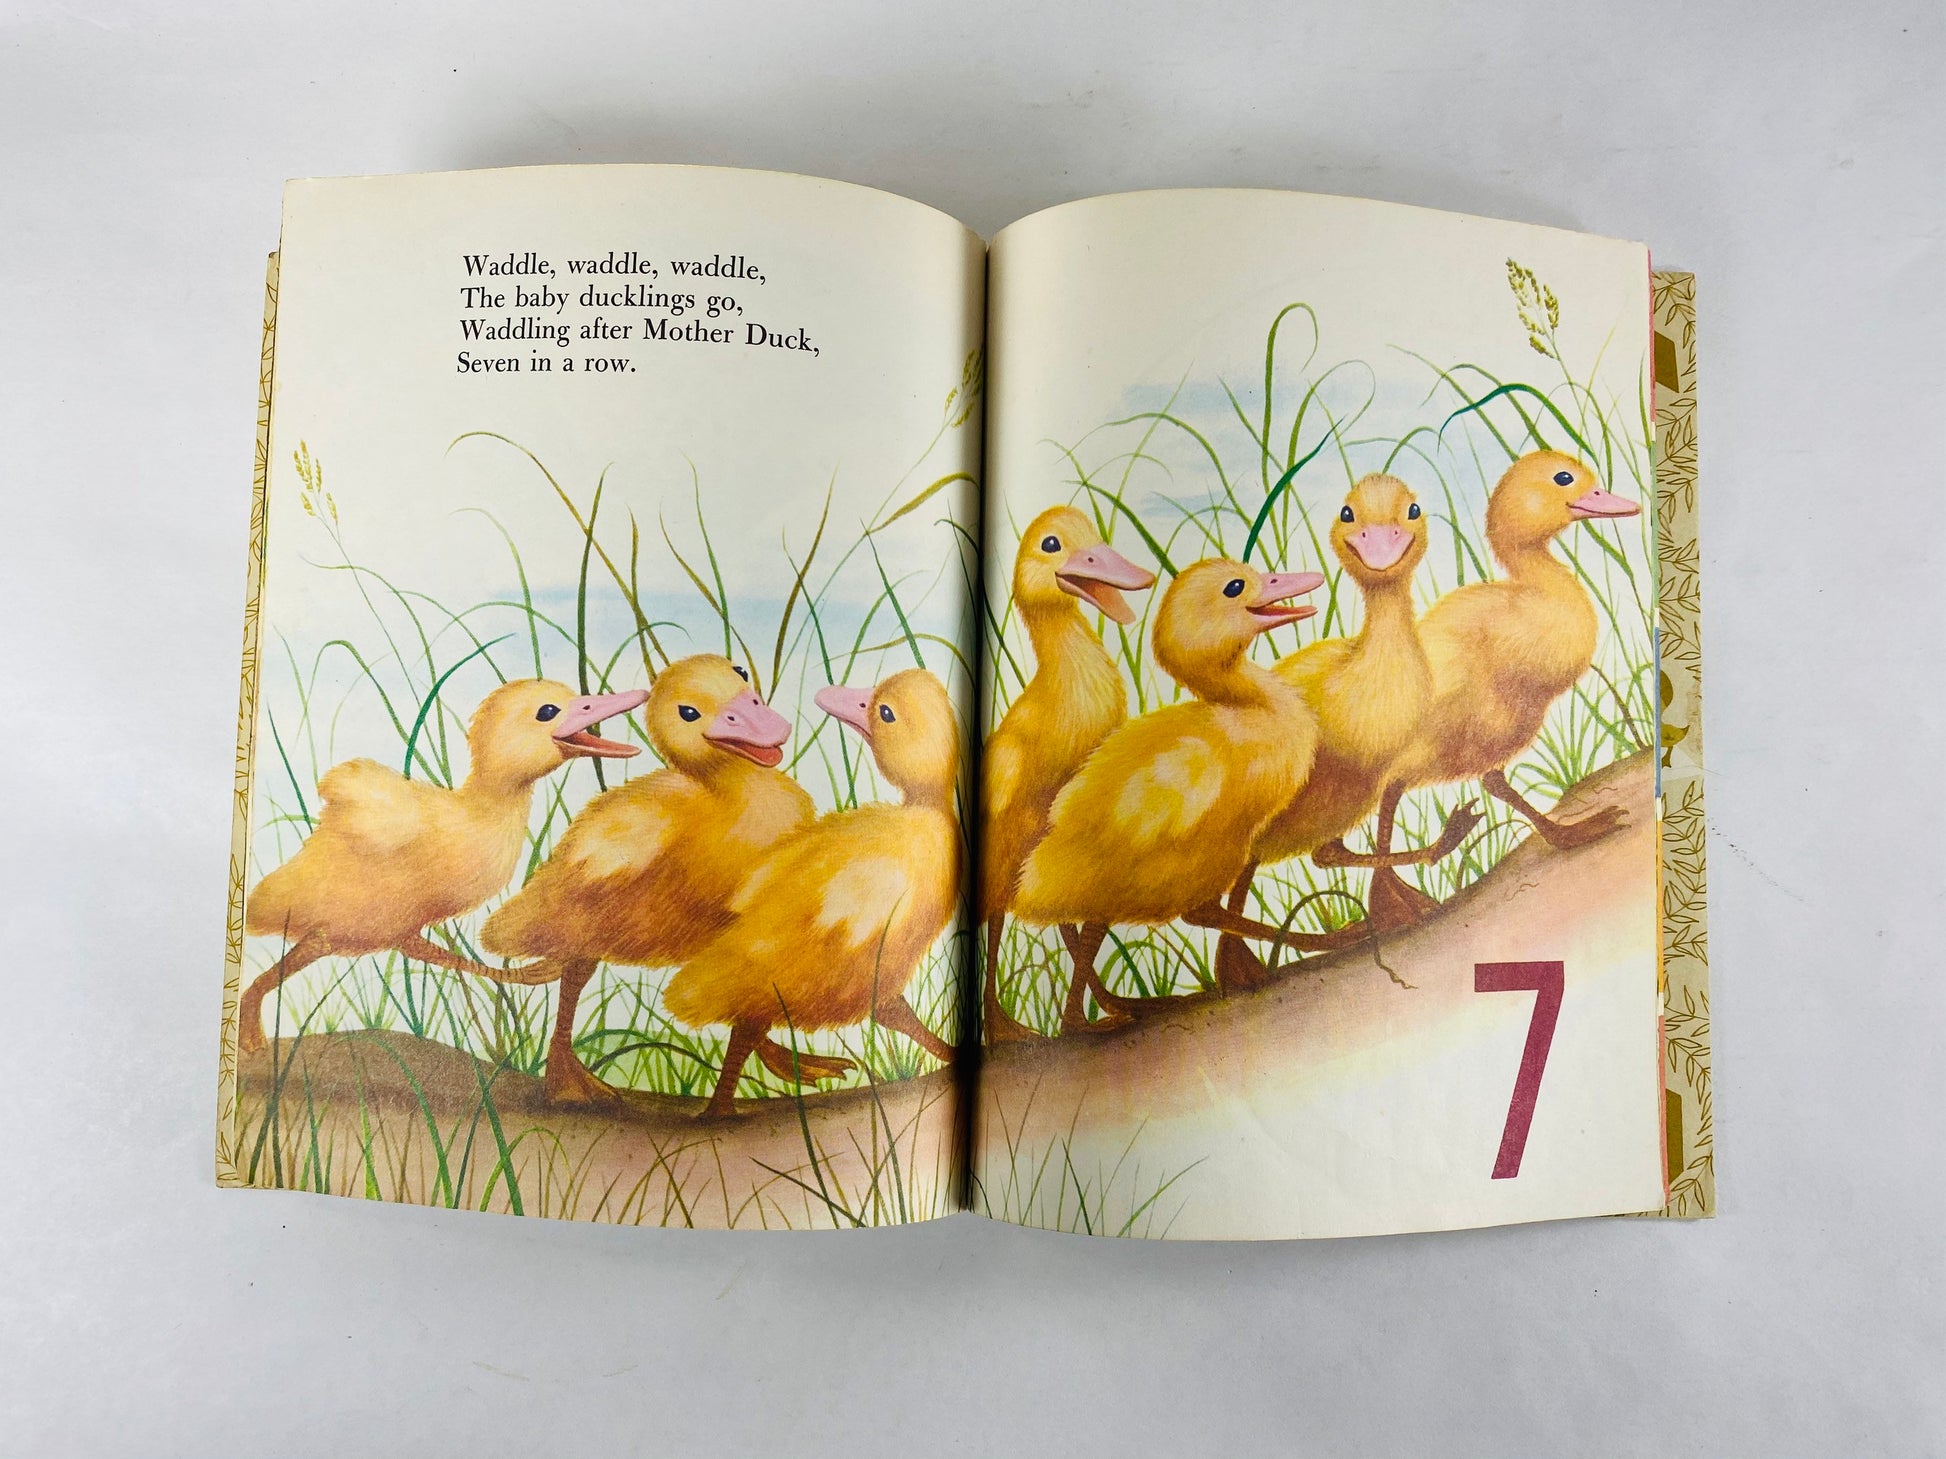 1985 My First Counting Book illustrates by Garth Williams. Little Golden Book. Vintage children's book Lilian Moore